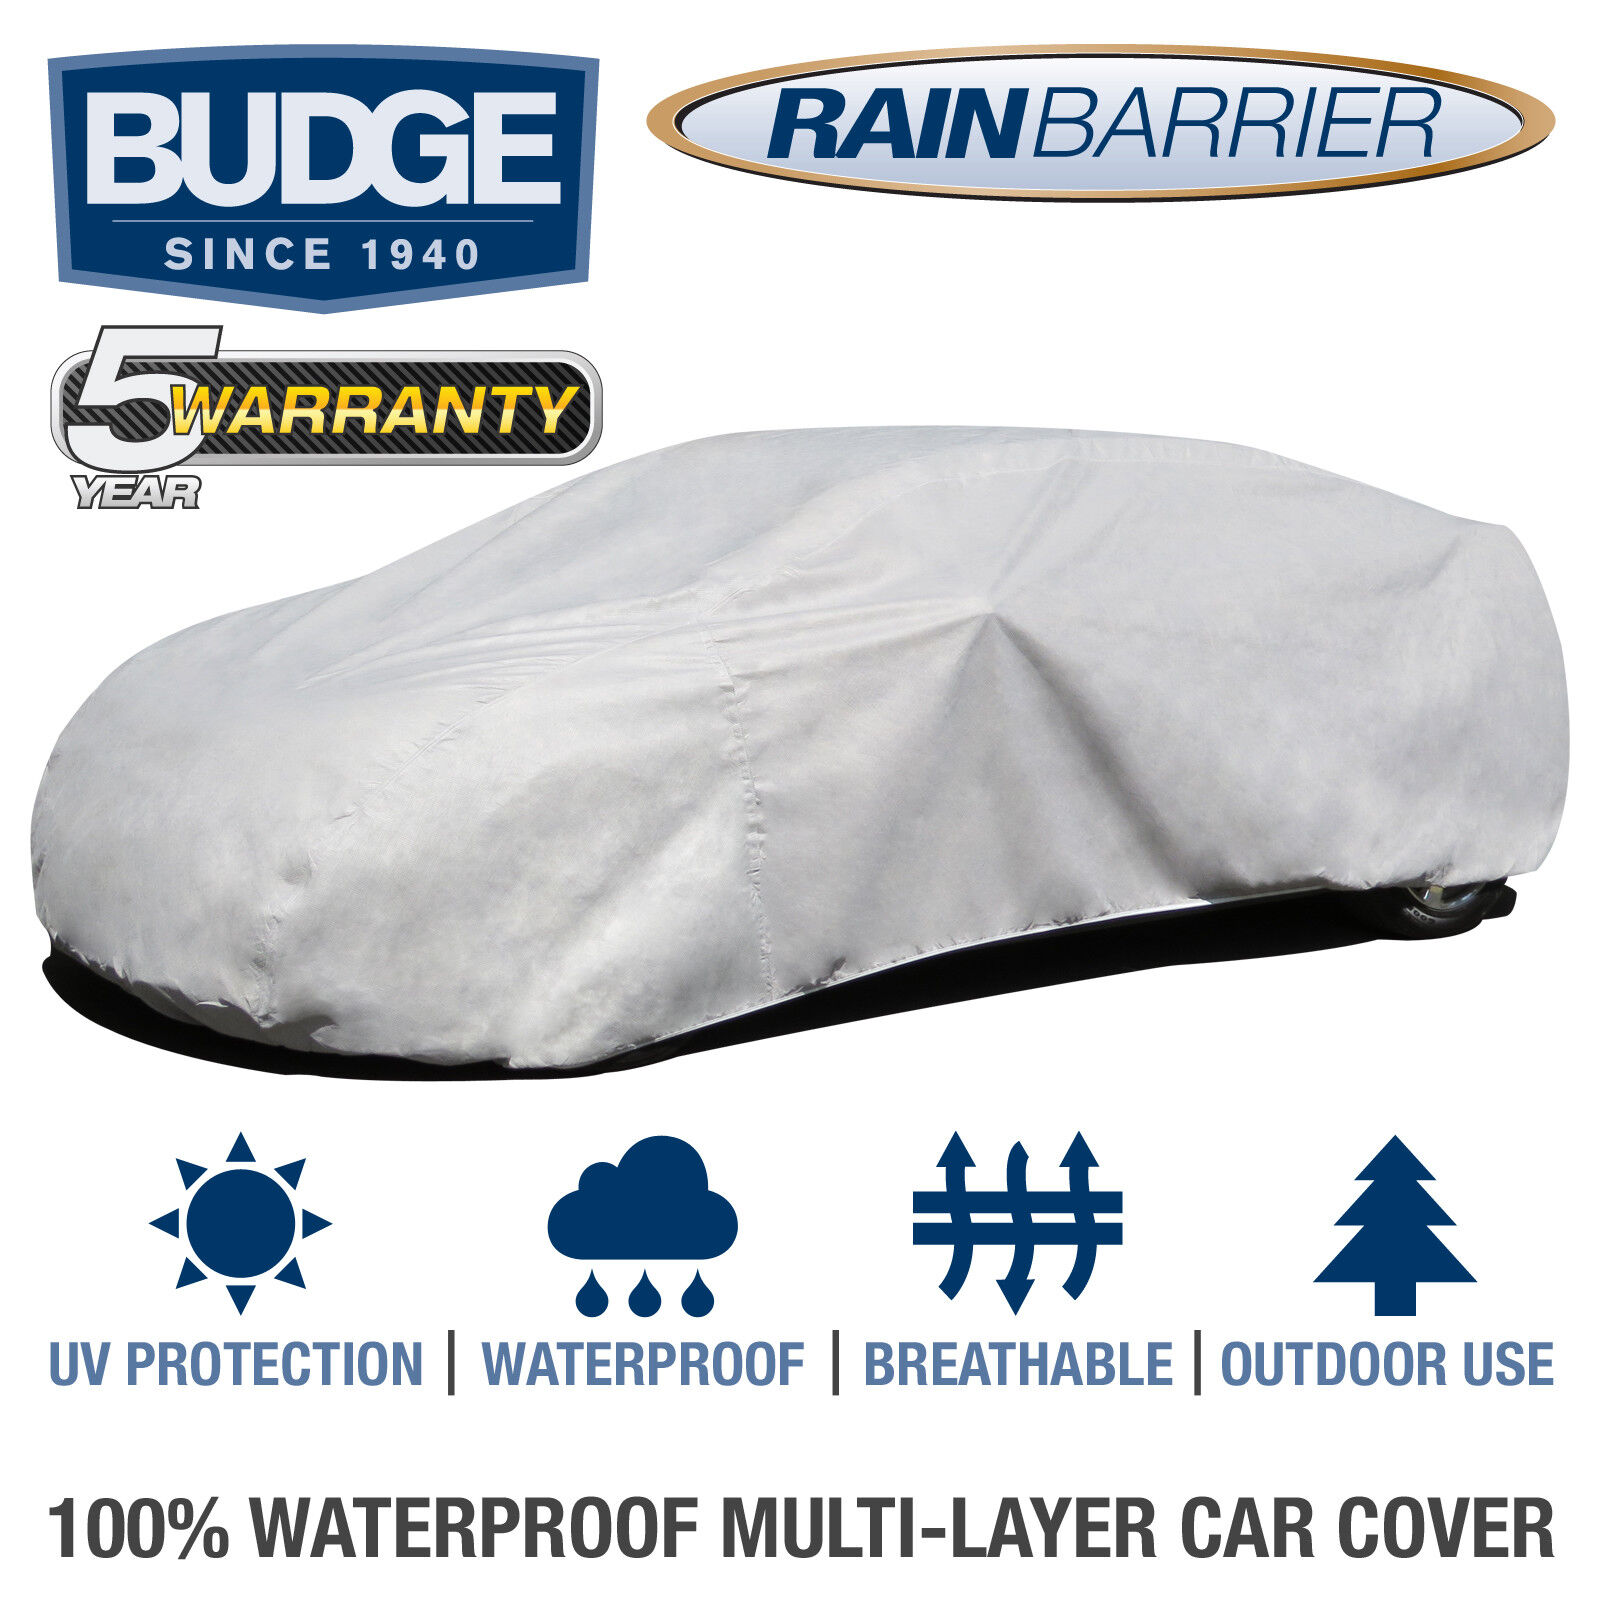 Budge Rain Barrier Car Cover Fits Sedans up to 22\' Long| Waterproof | Breathable